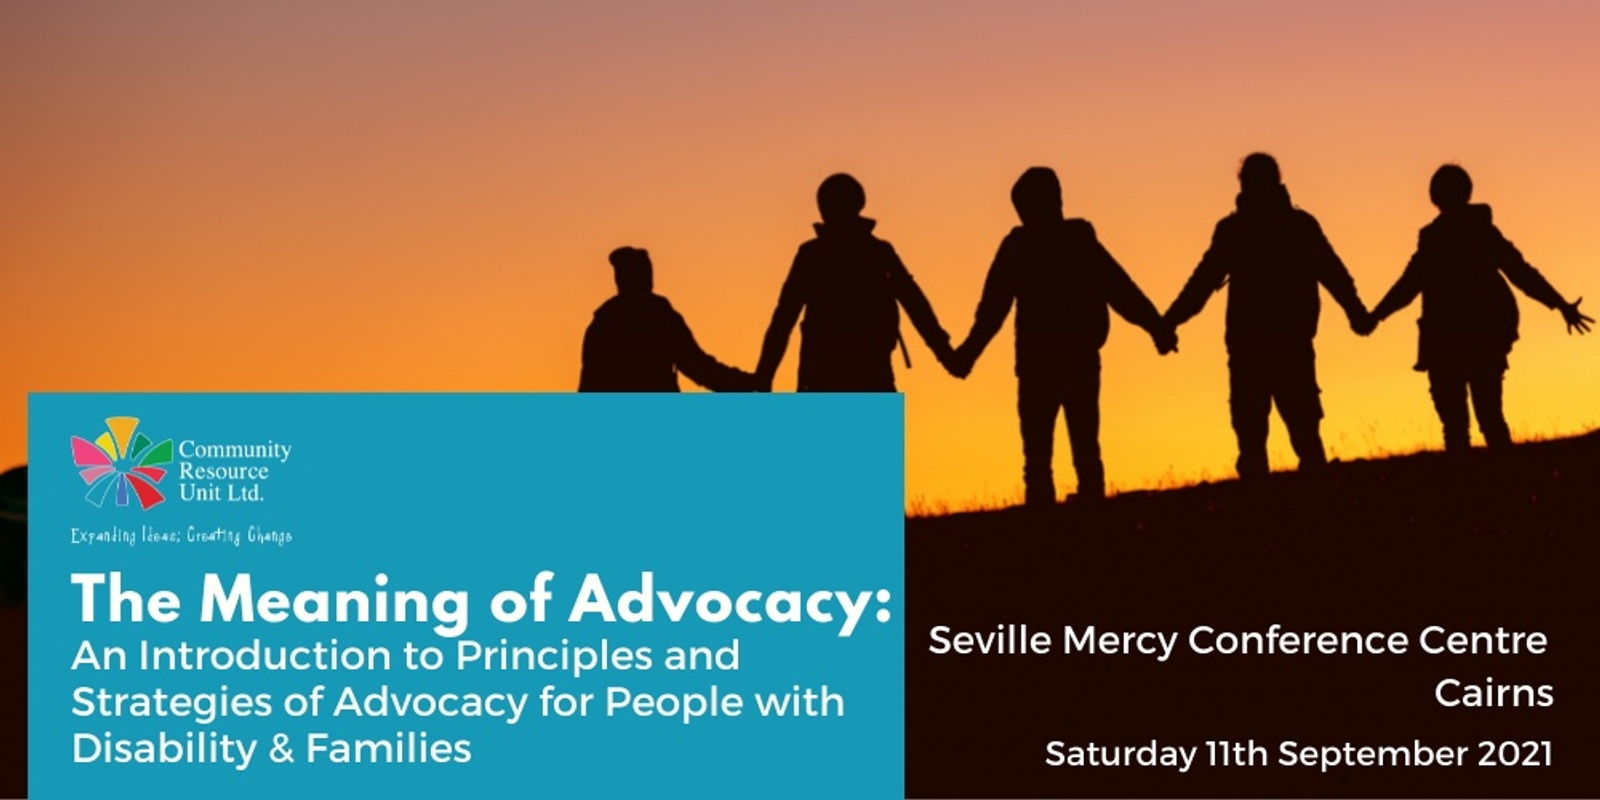 Banner image for Cairns: The Meaning of Advocacy: An Introduction to the Principles & Strategies of Advocacy for People with Disability & Families